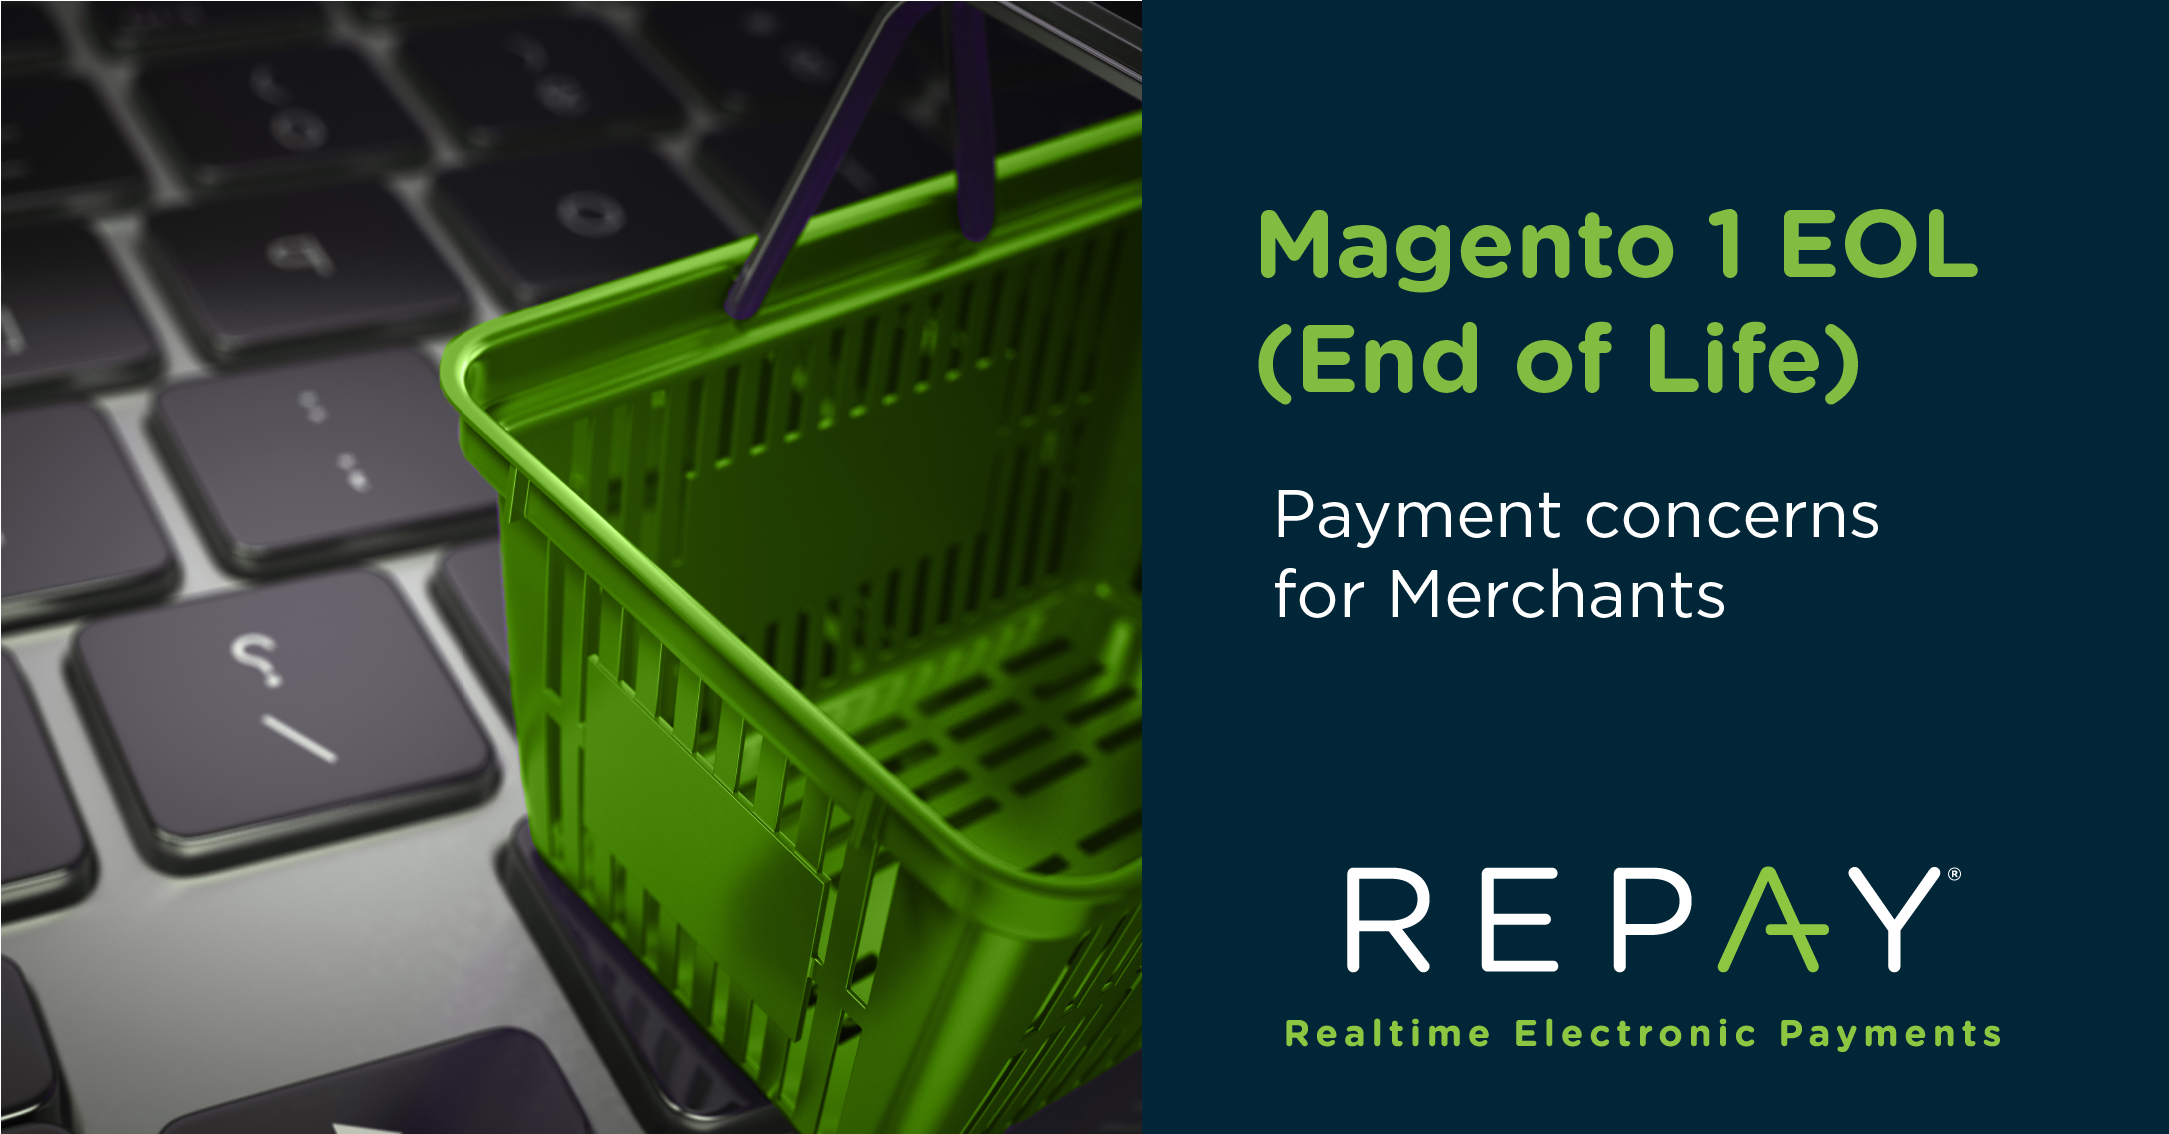 Magento 1 End of Life (EOL) - eCommerce Payment Concerns for Merchants